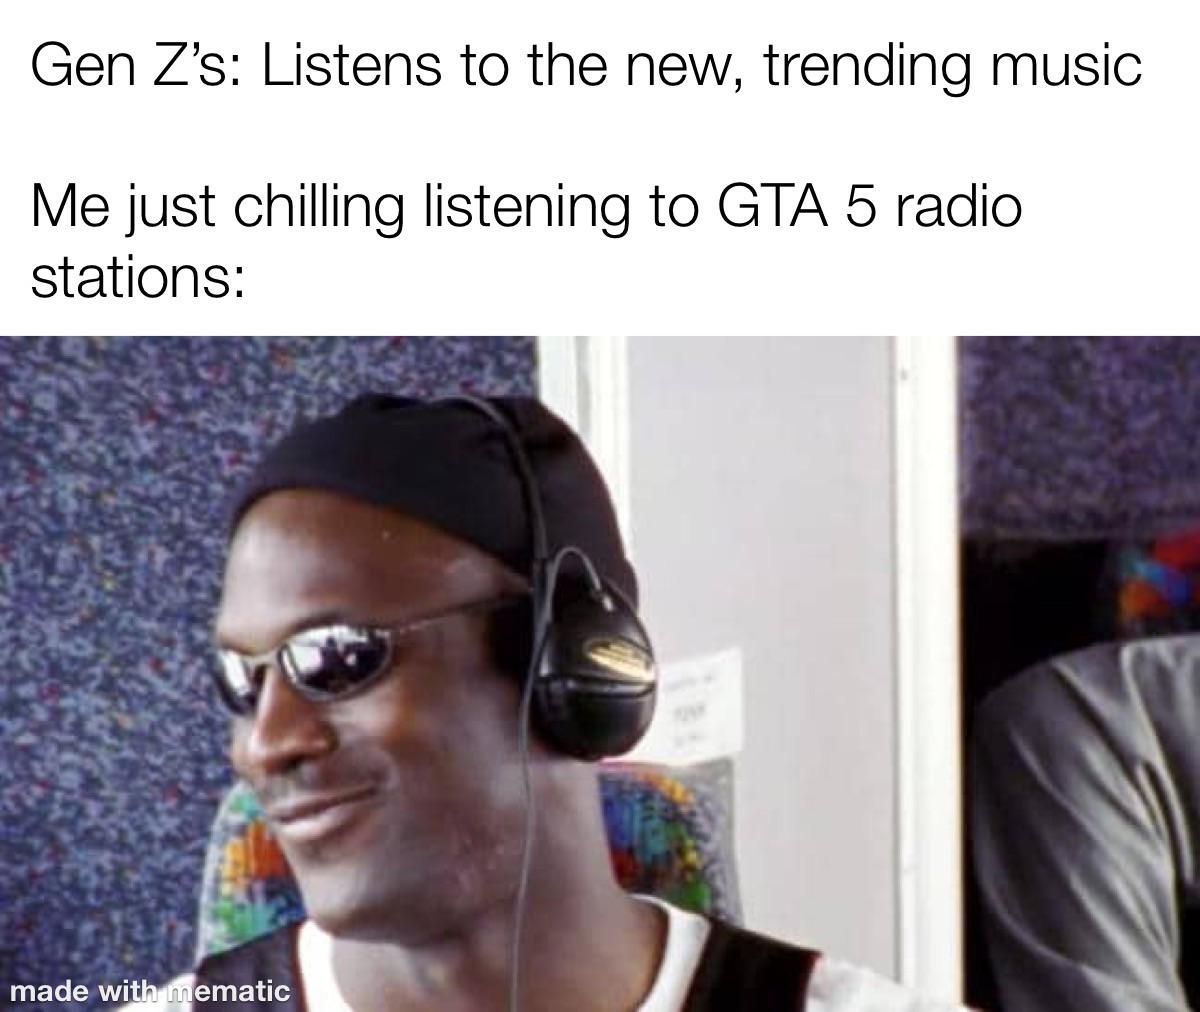 michael jordan kenny lattimore - Gen Z's Listens to the new, trending music Me just chilling listening to Gta 5 radio stations made with mematic